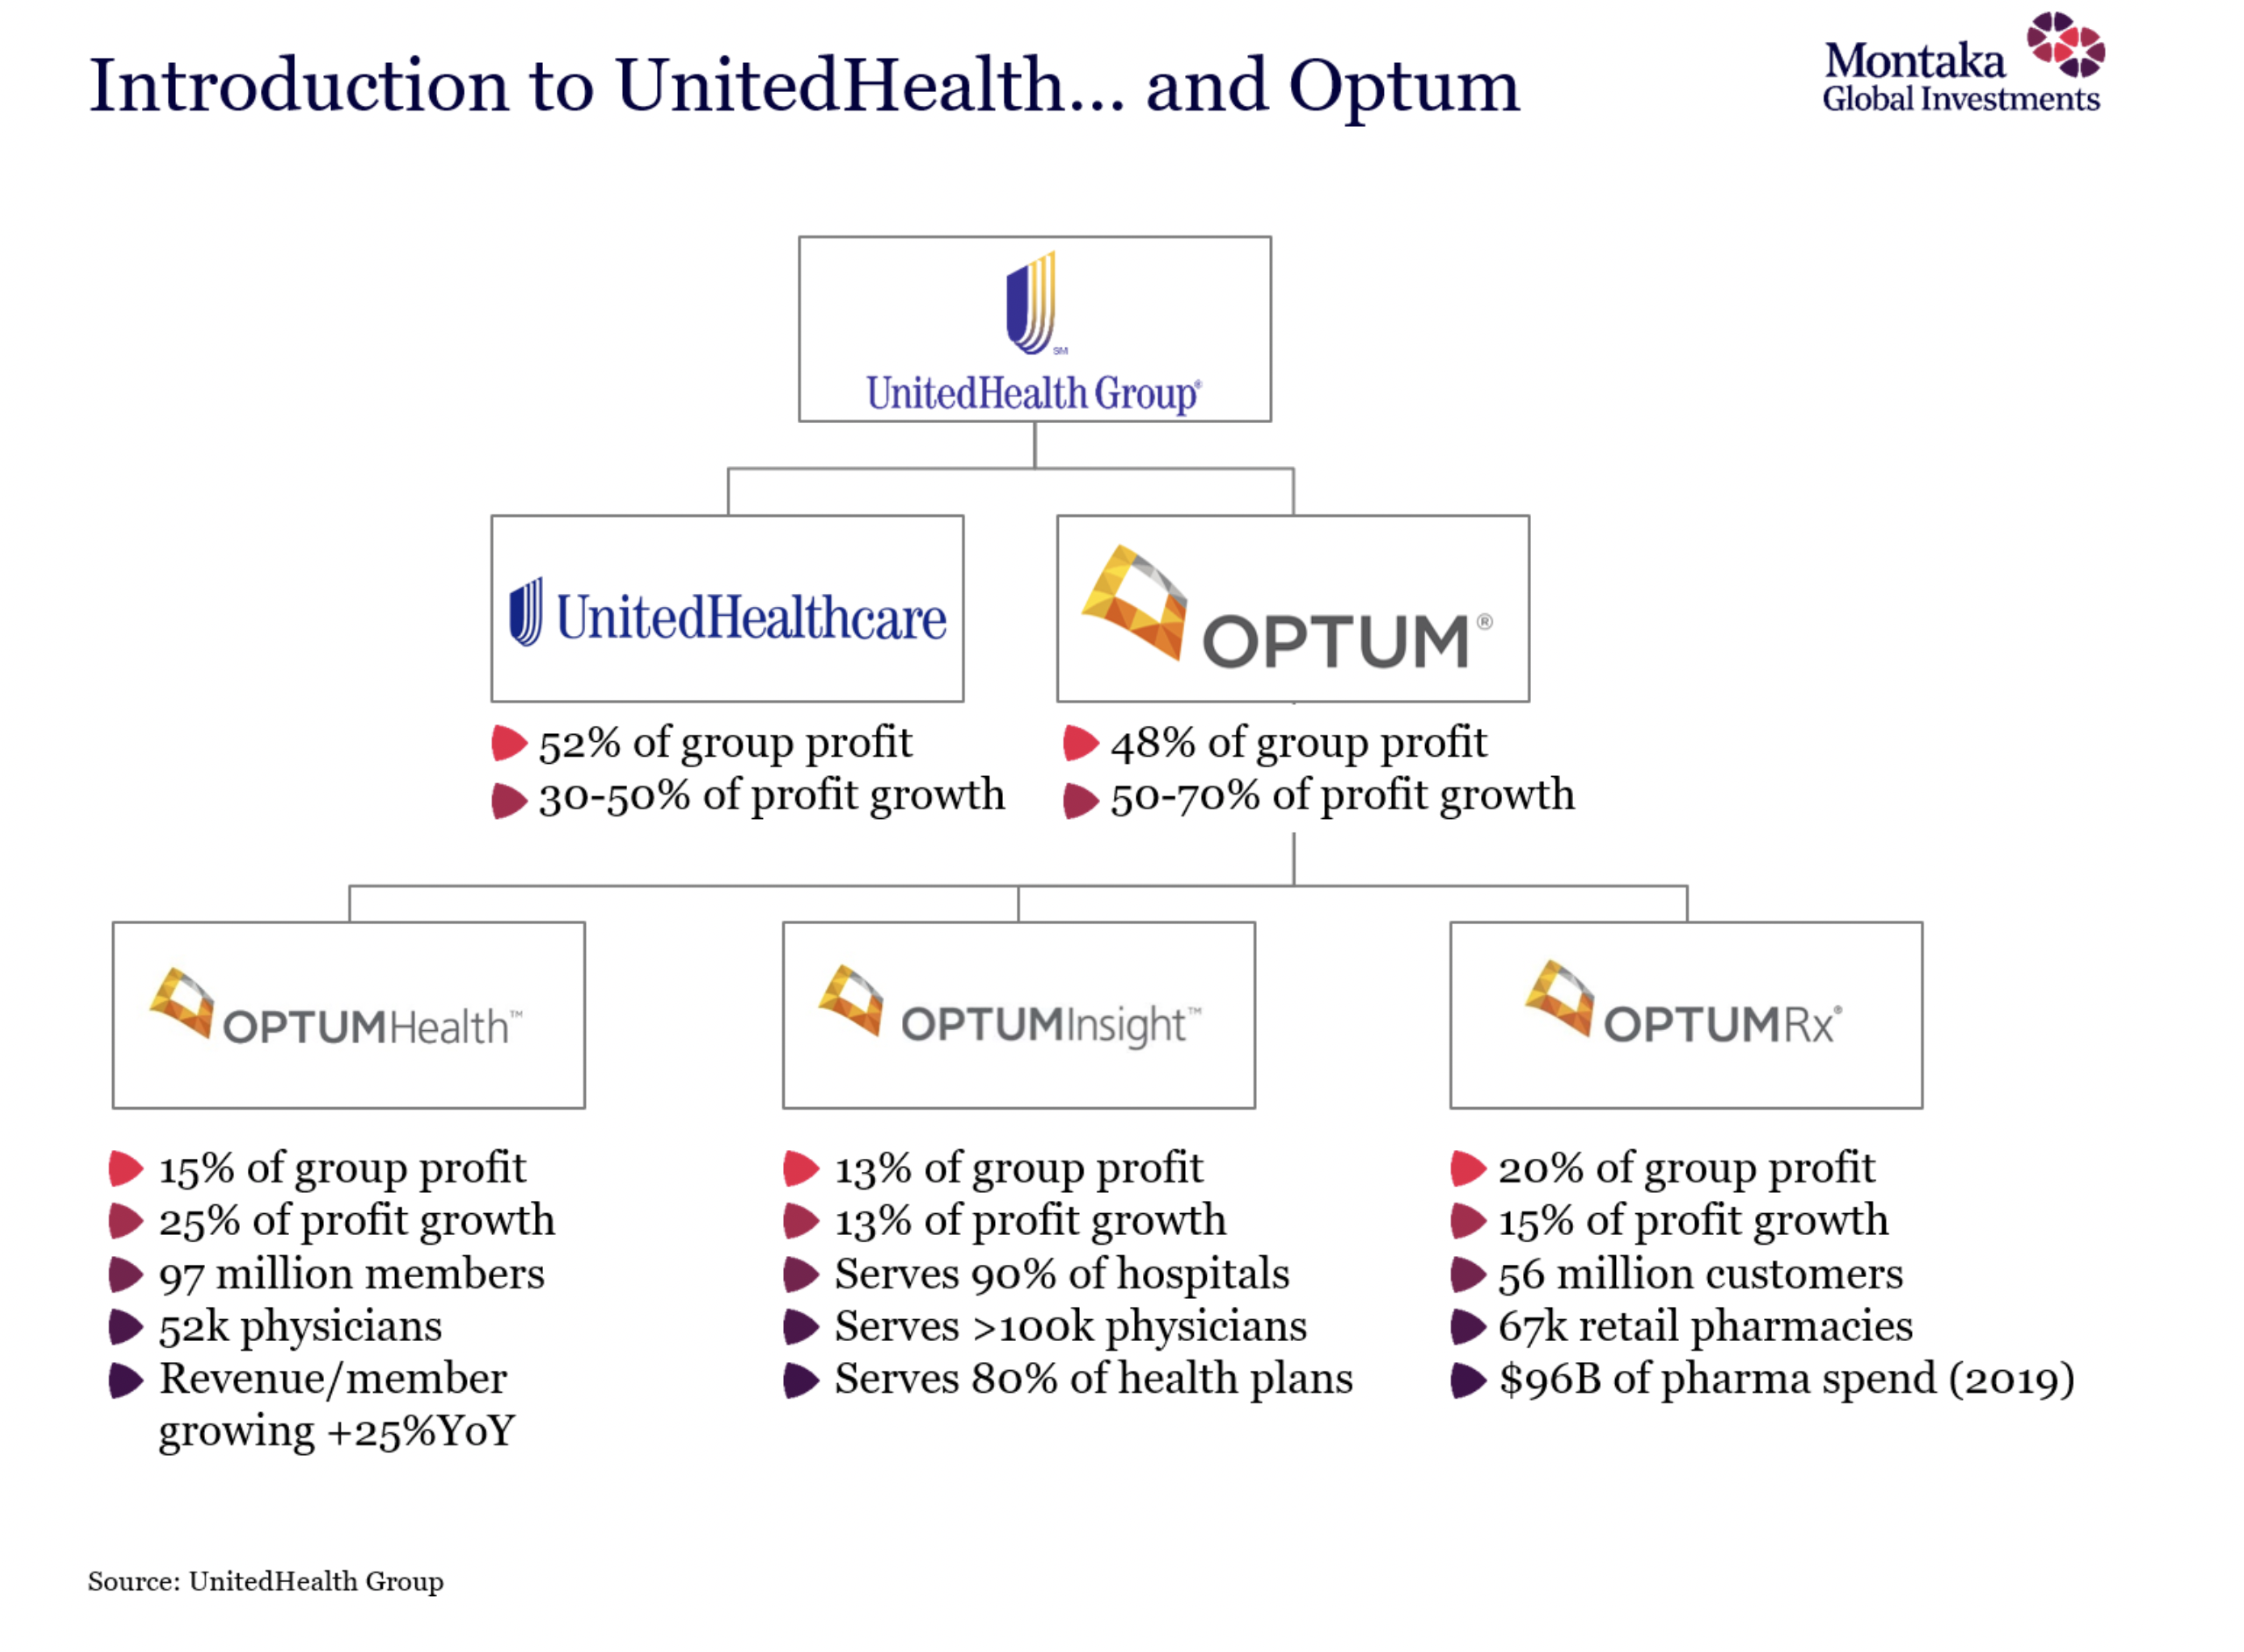 What is the relationship between UnitedHealthcare and Optum?